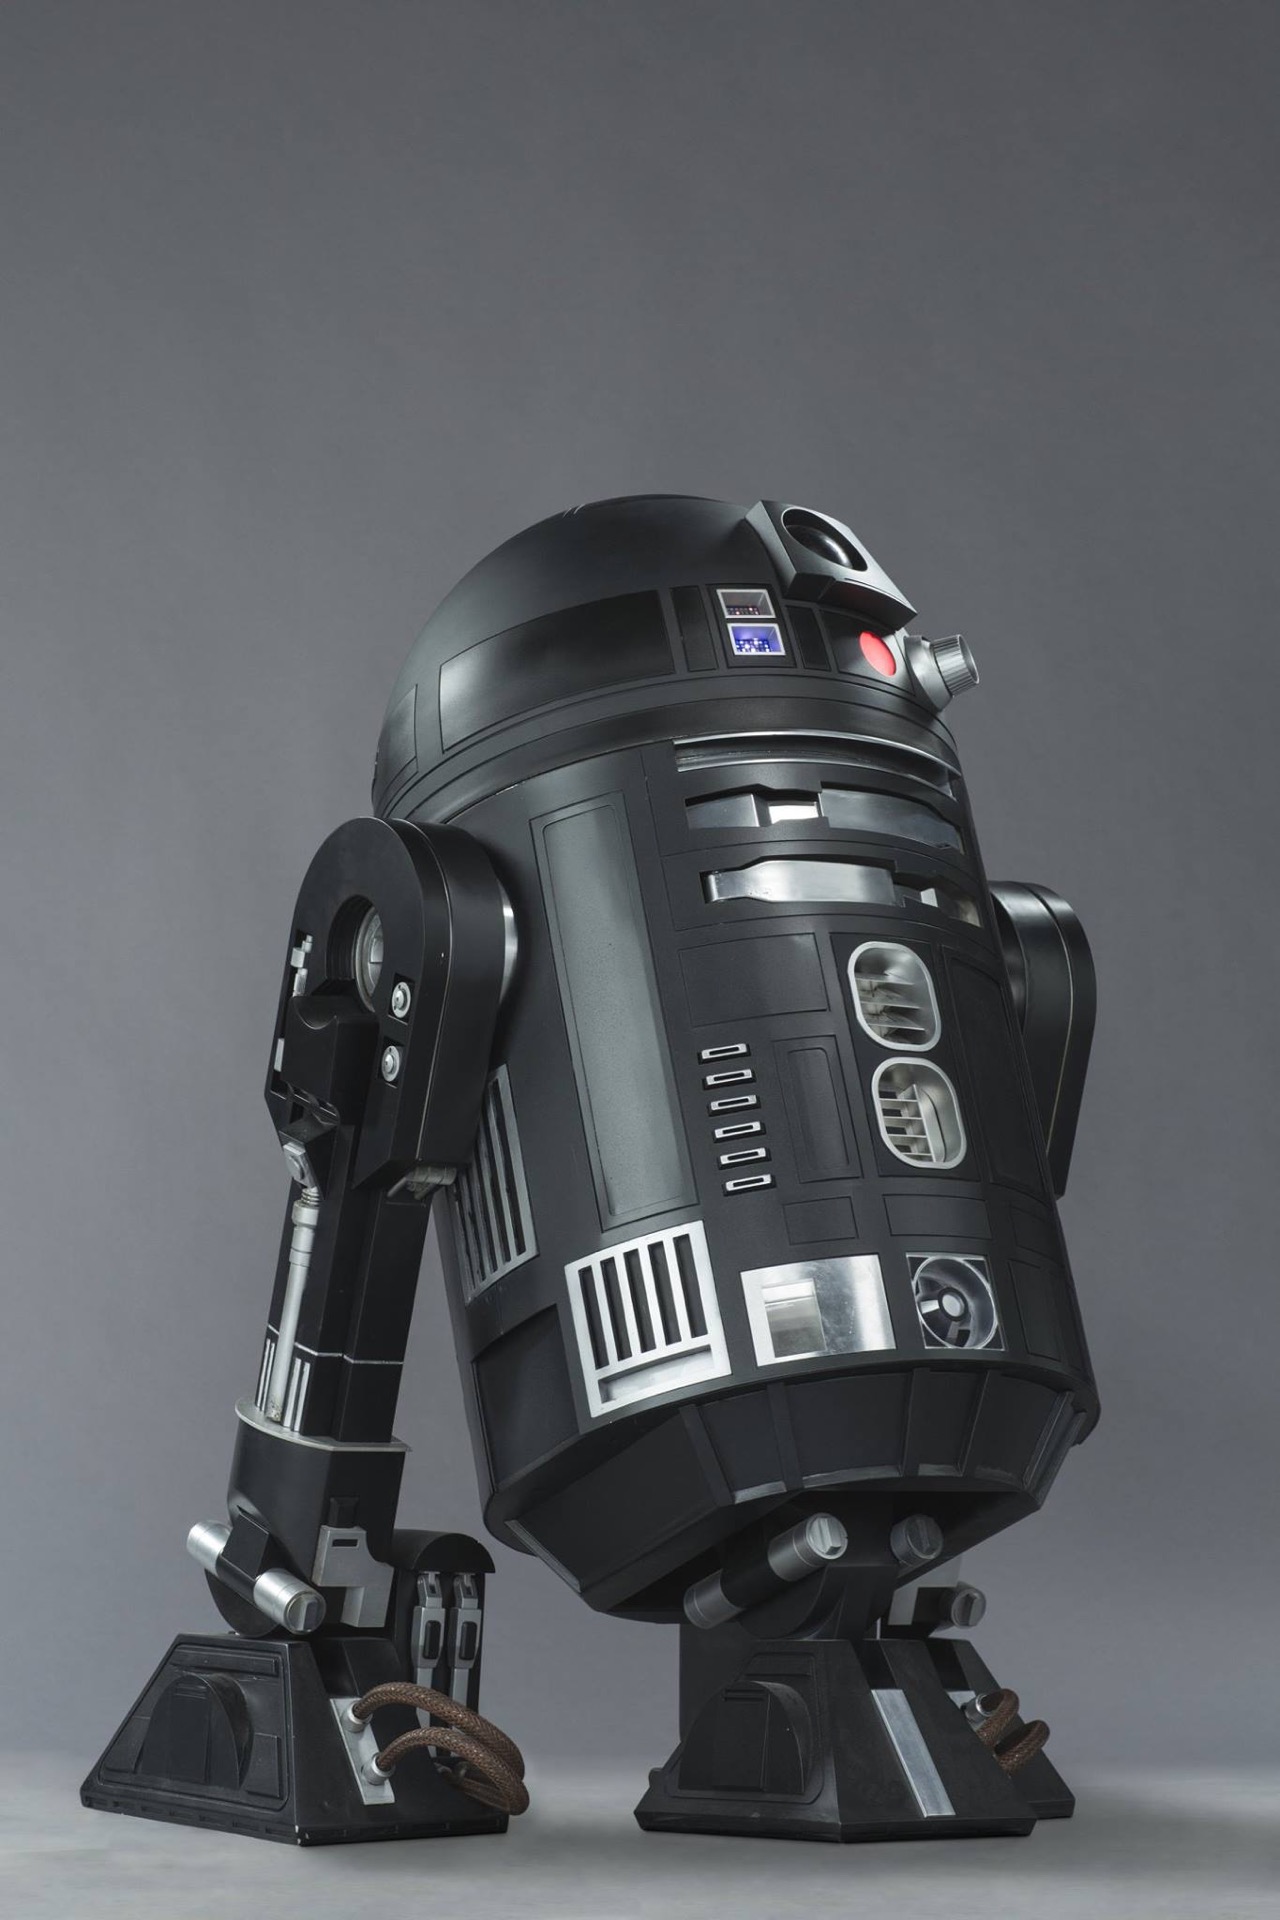 New Black R2 D2 Style Droid Revealed For Star Wars Rogue One Film Junkee